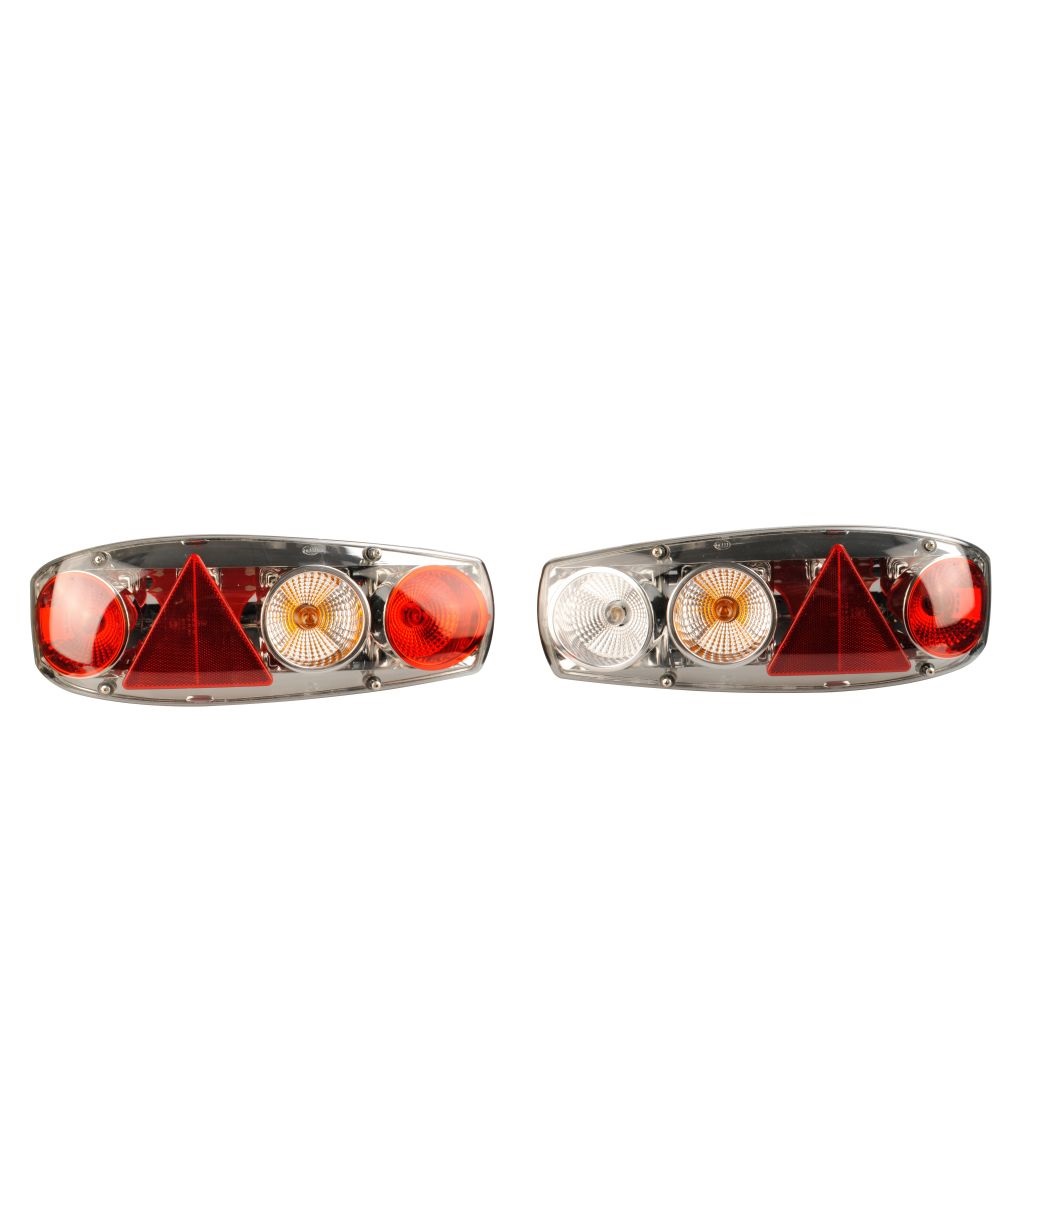 Hella Caraluna II Plus Chrome Tail Light for Caravans available in Left or Right